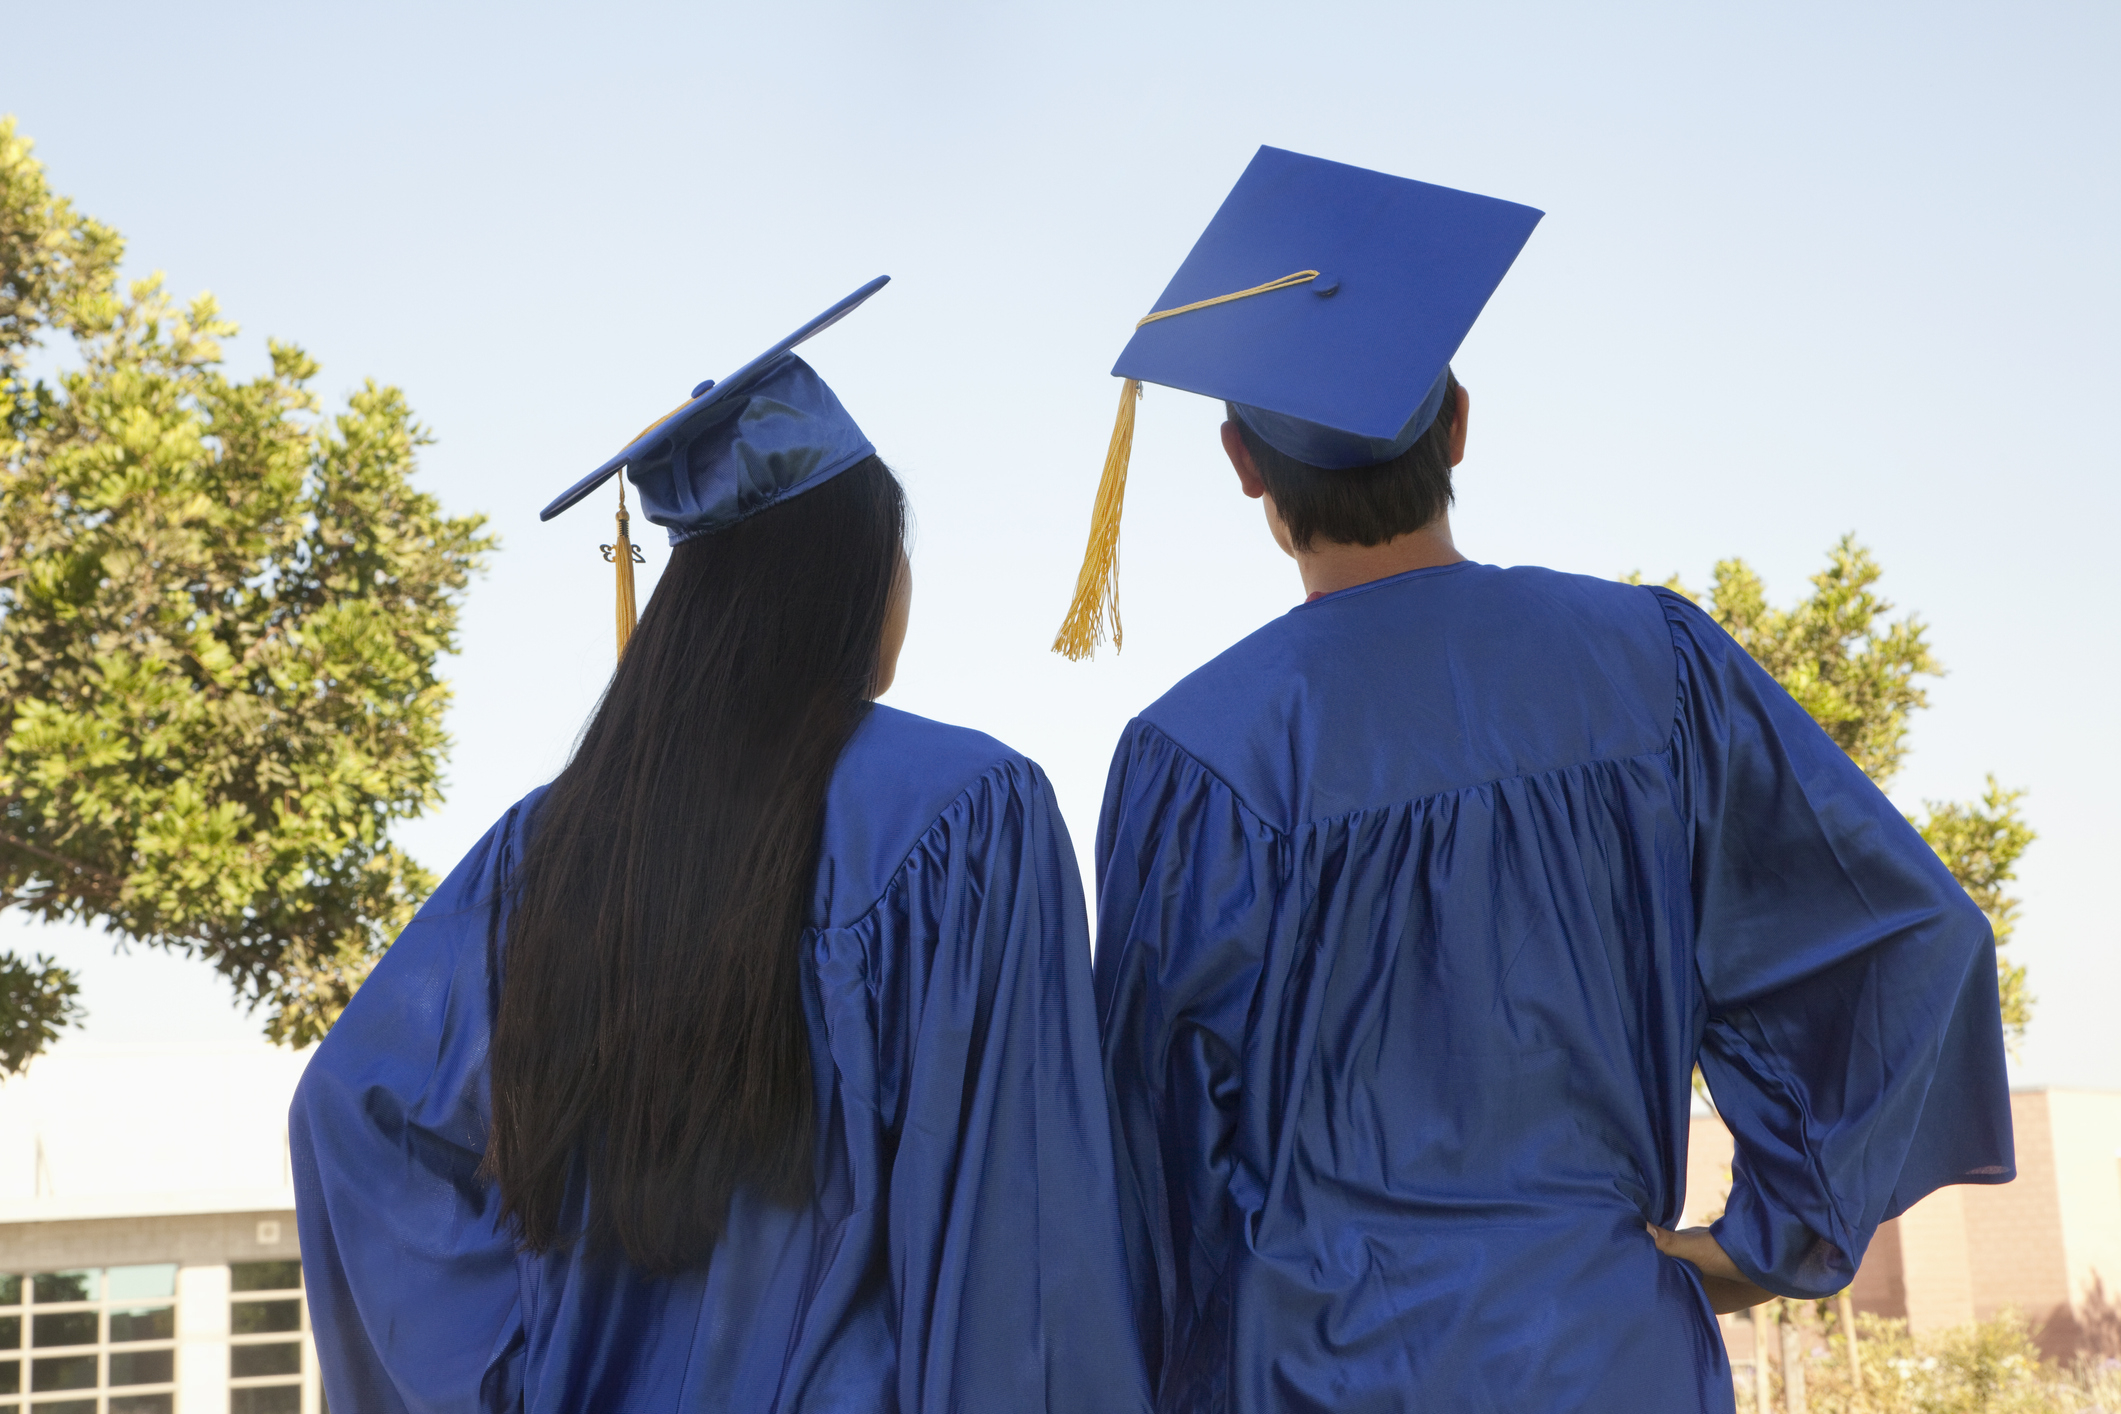 Young people wearing graduation caps and gowns